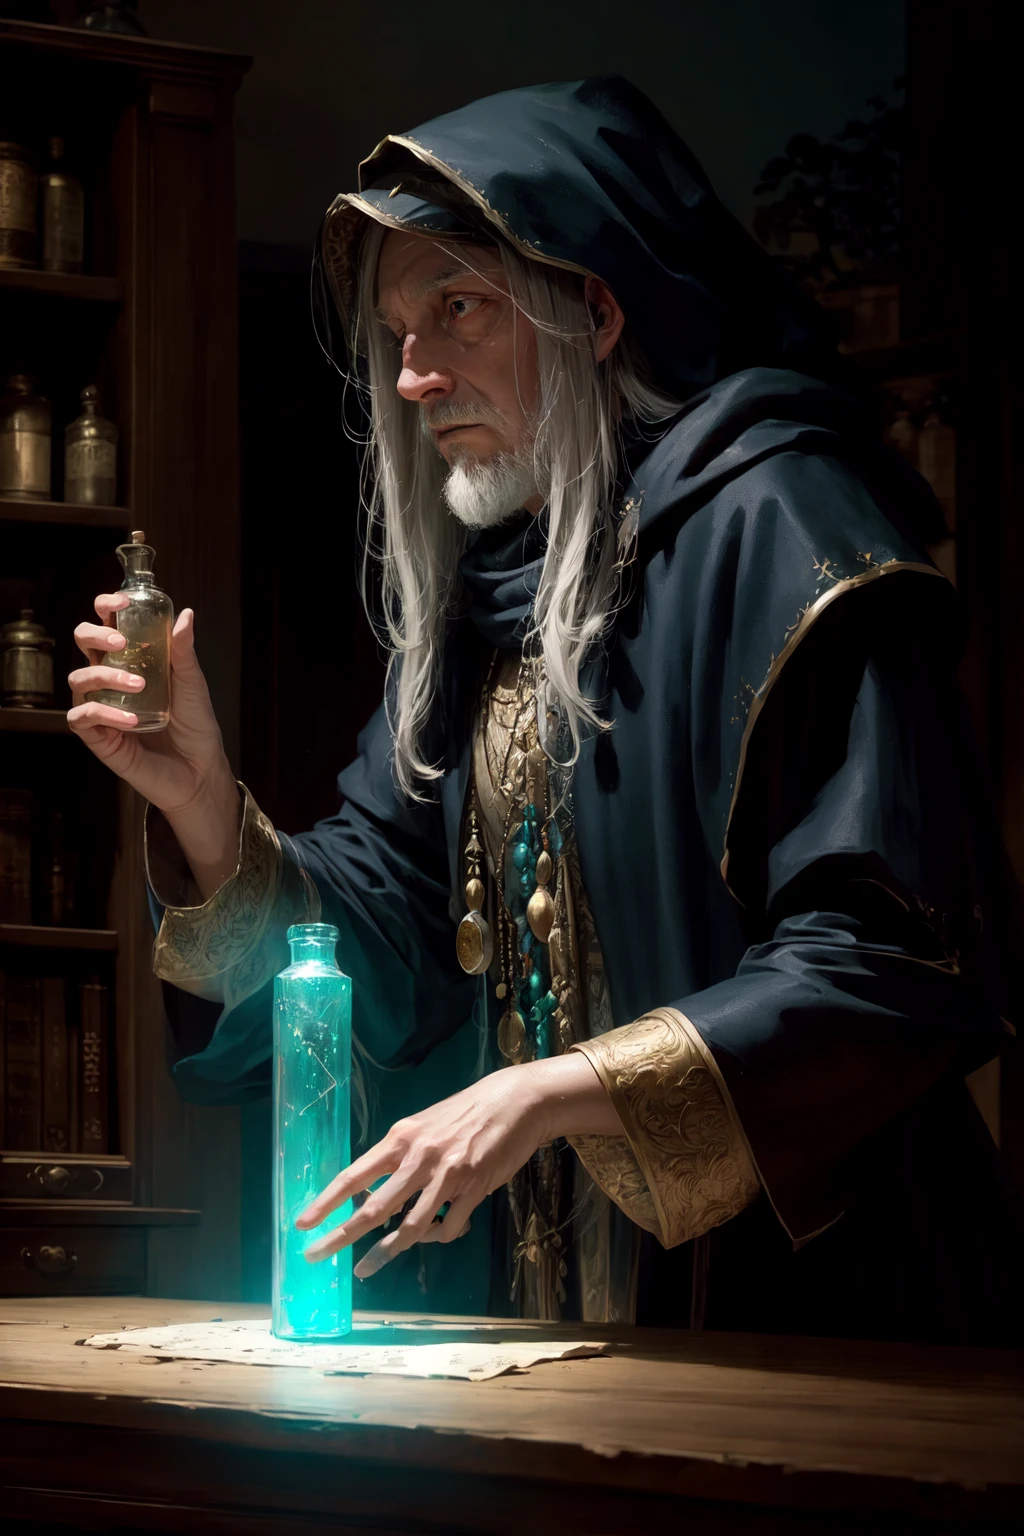 realistic, masterpiece, best quality, old wise wizard mixing potions, moody lighting, glow, glowing, mysterious, mystical, magical, rim lighting